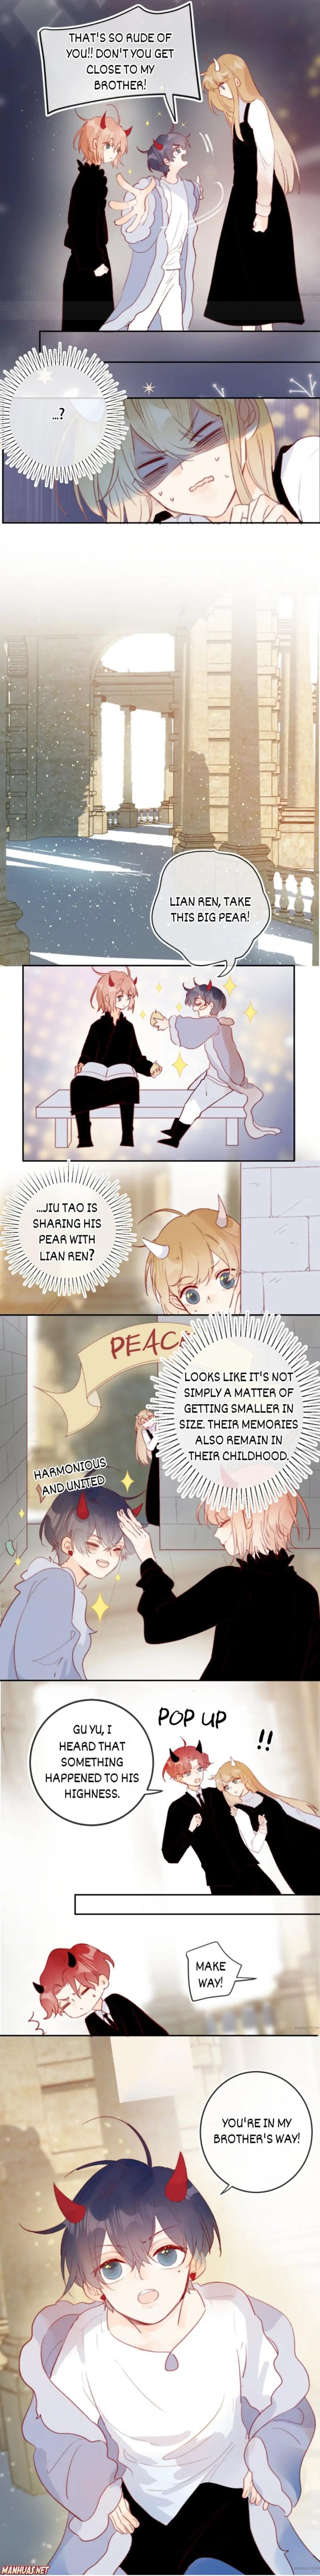 Flowers In The Secret Place - Page 2